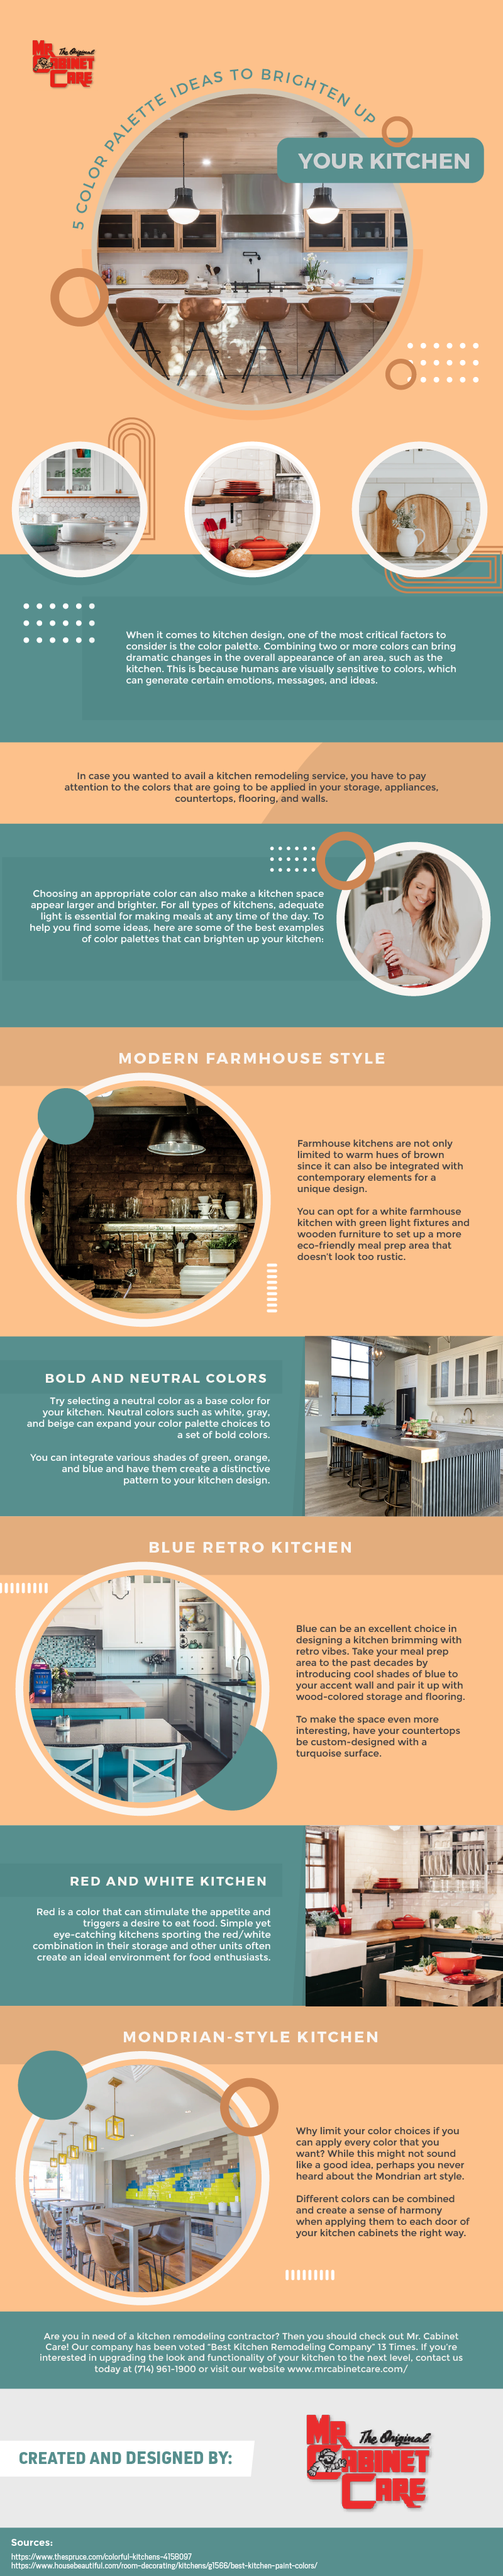 5 Color Palette Ideas to Brighten up Your Kitchen - Infographic